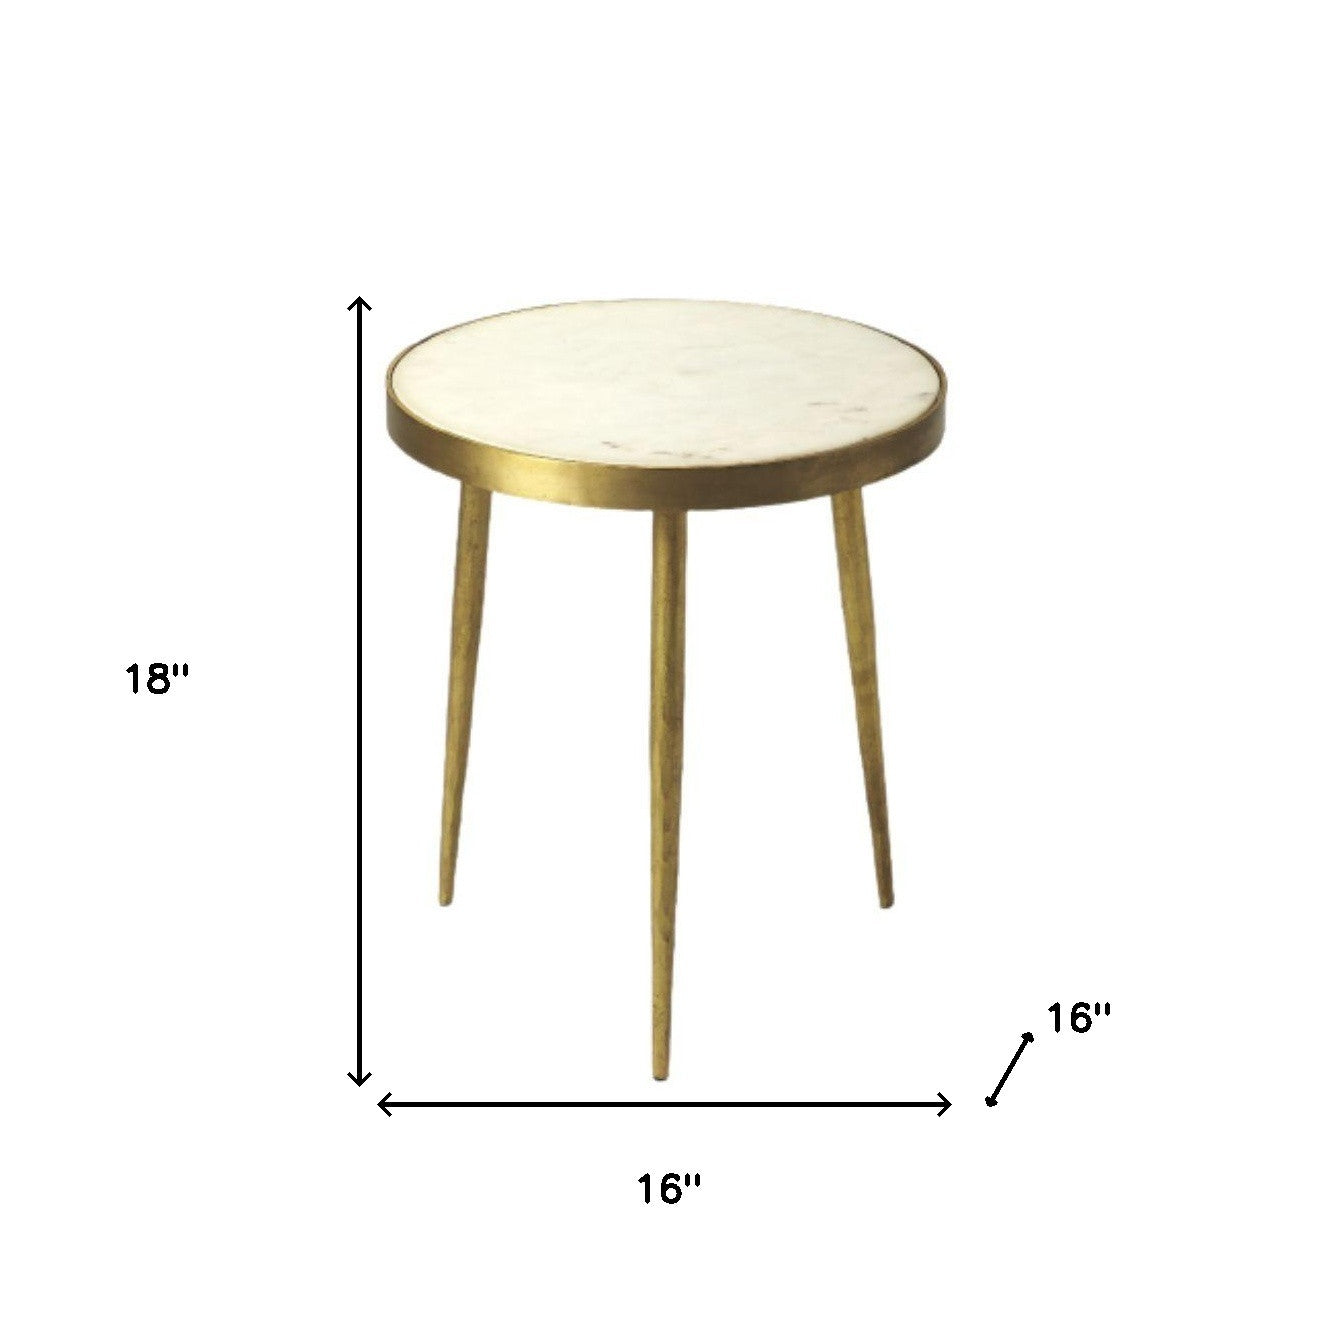 18" Gold And White Marble Round End Table